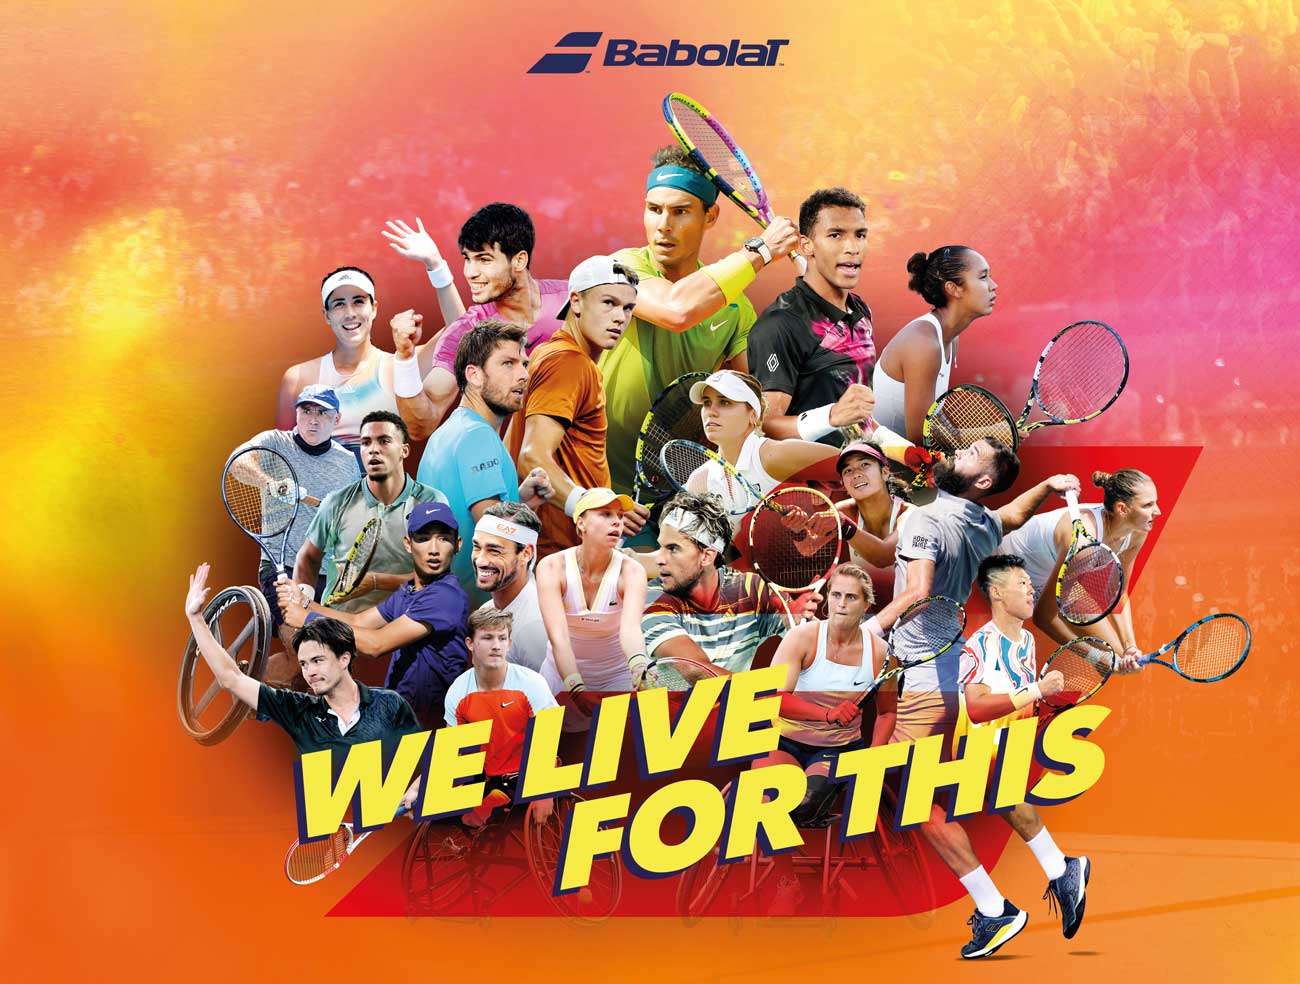 Babolat-We-live-for-this